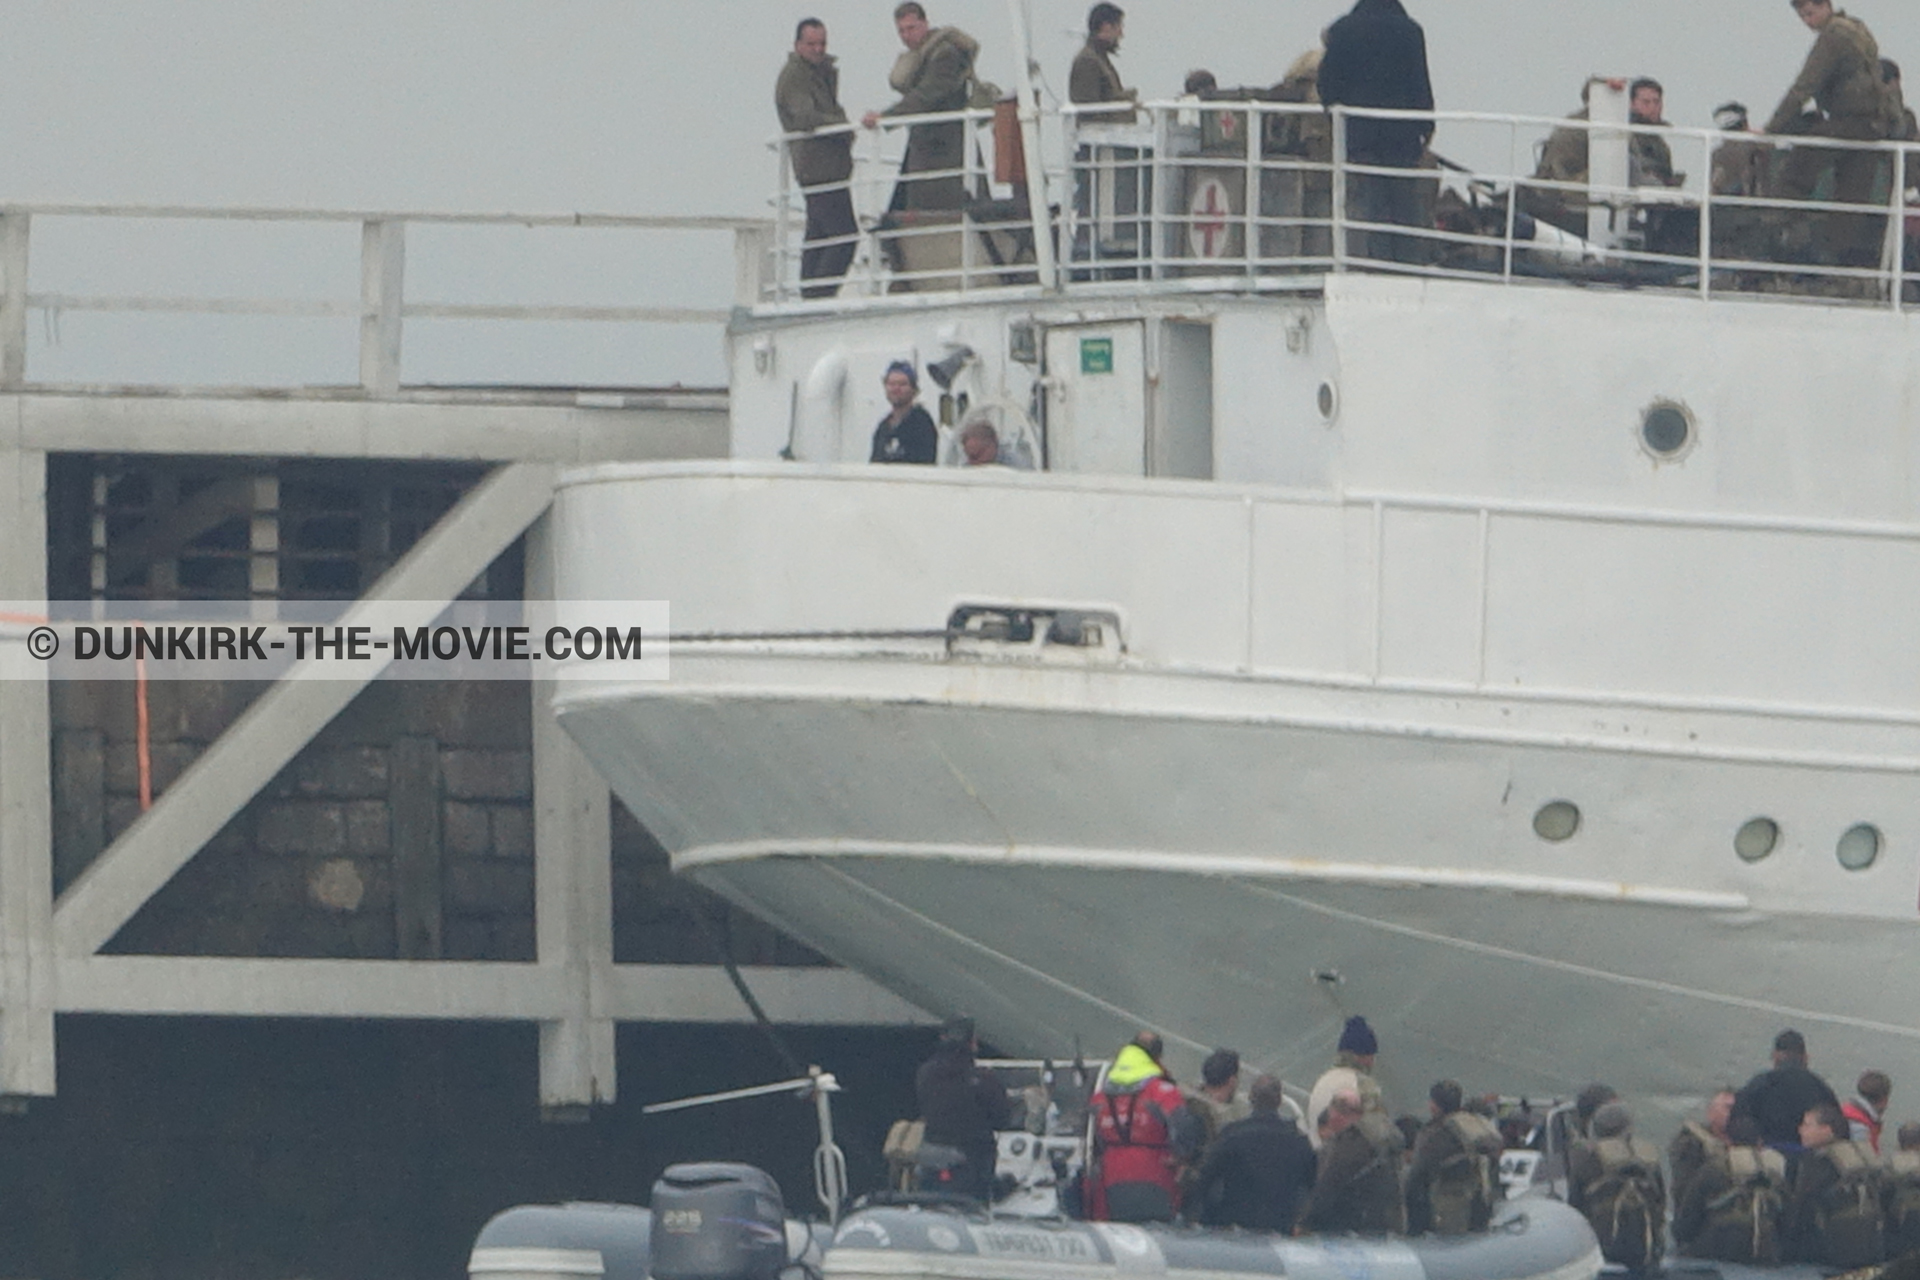 Picture with grey sky, supernumeraries, EST pier, technical team, inflatable dinghy, M/S Rogaland,  from behind the scene of the Dunkirk movie by Nolan